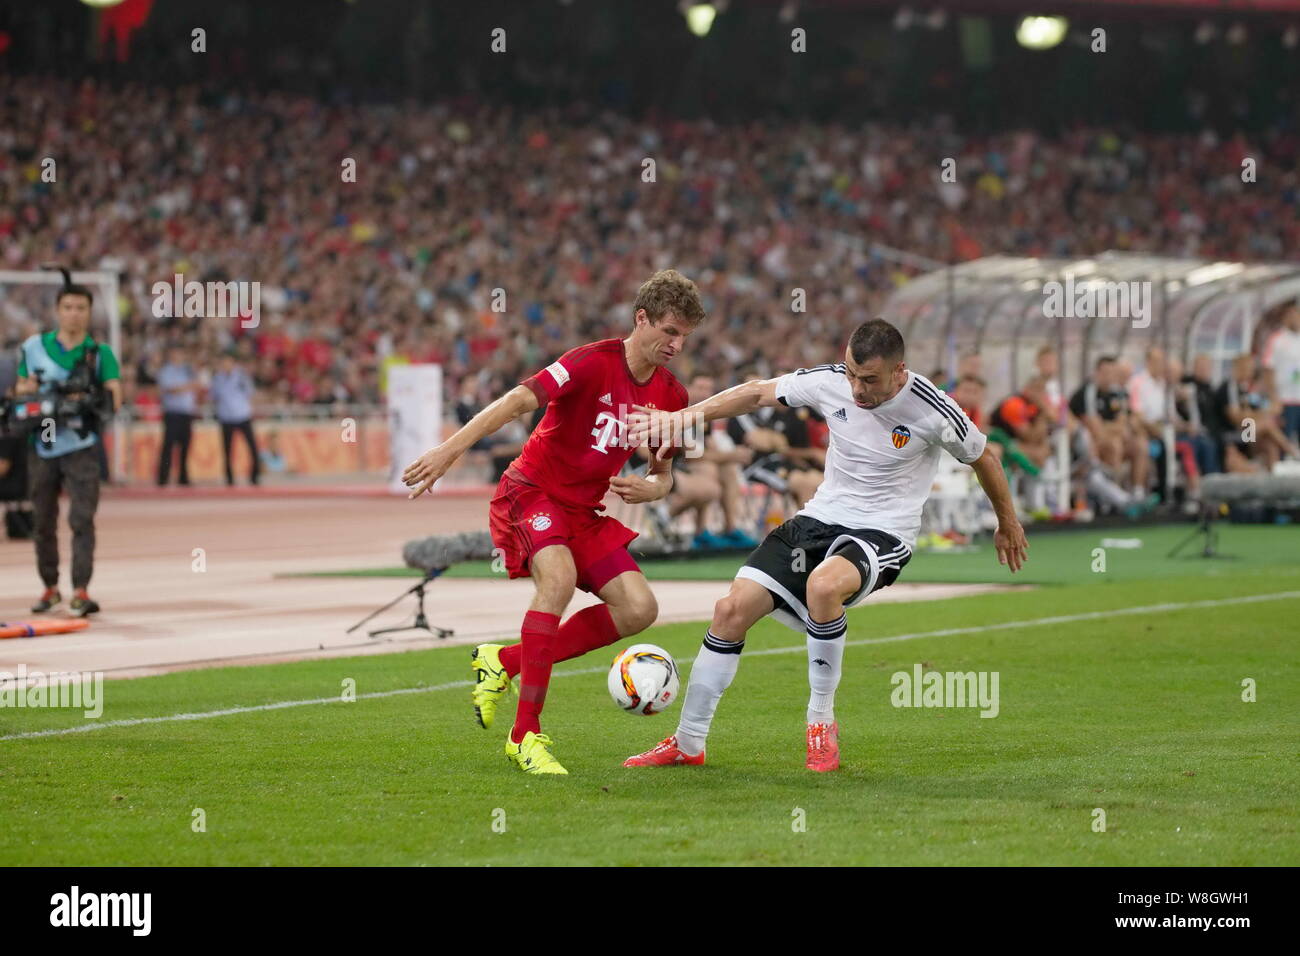 Thomas Mueller of Bayern Munich, left, challenges Javi Fuego of FC Valencia during their friendly soccer match in Beijing, China, 18 July 2015.   Thom Stock Photo